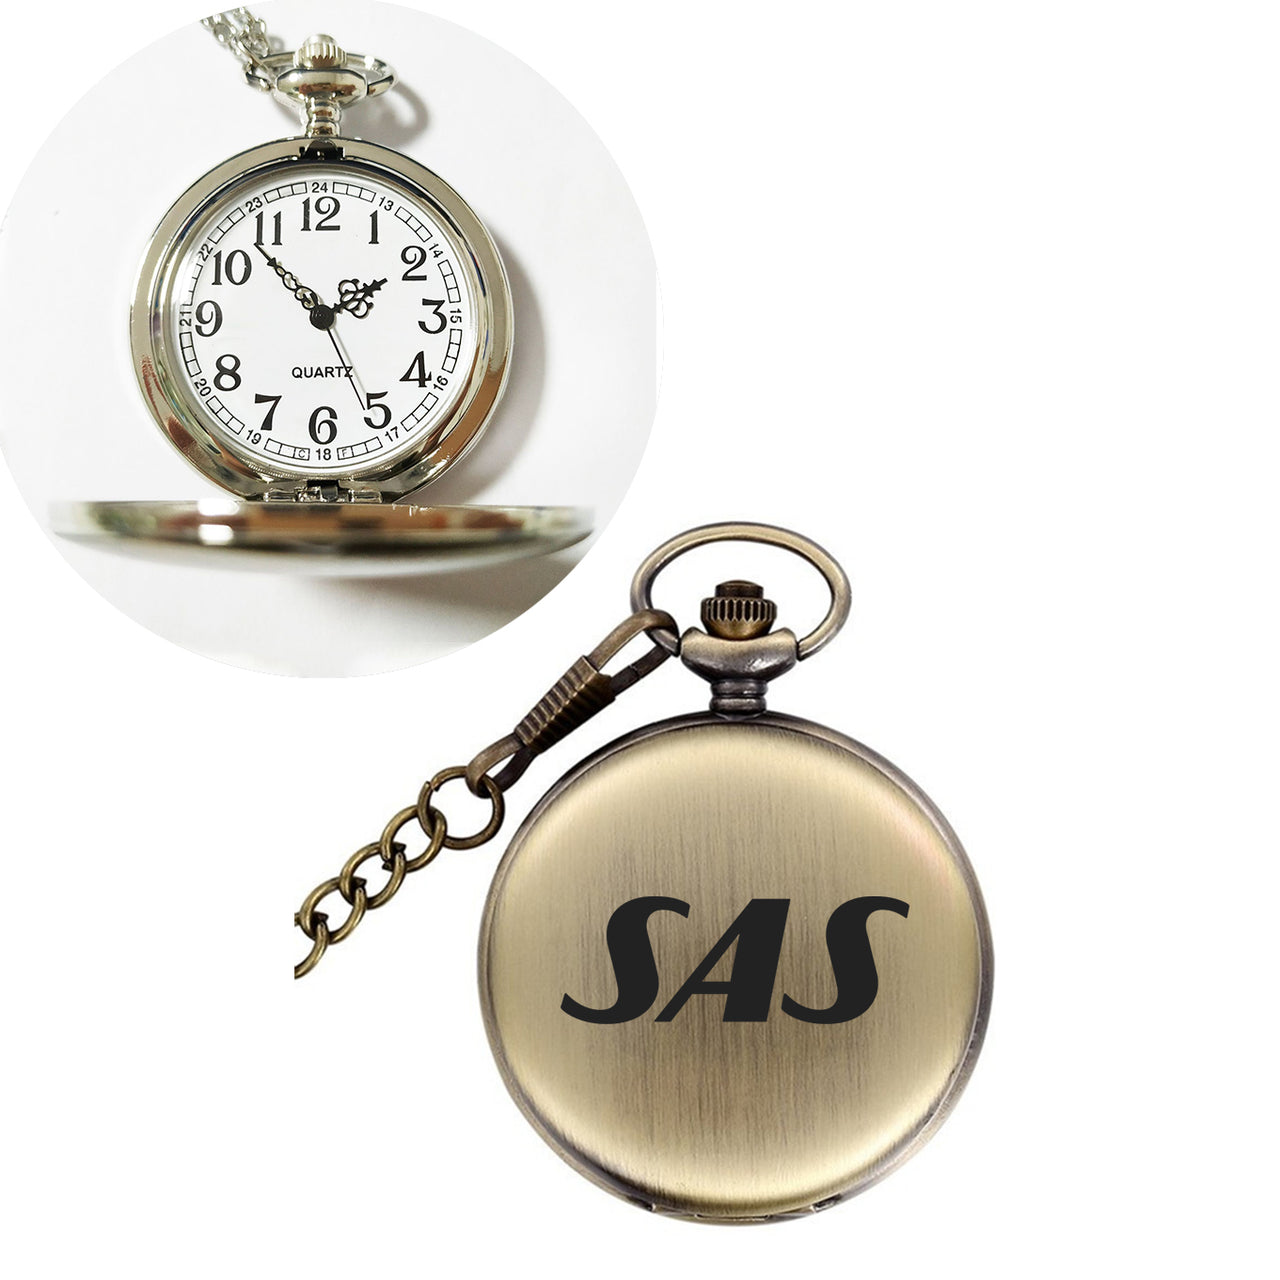 SAS Airlines Airlines Designed Pocket Watches